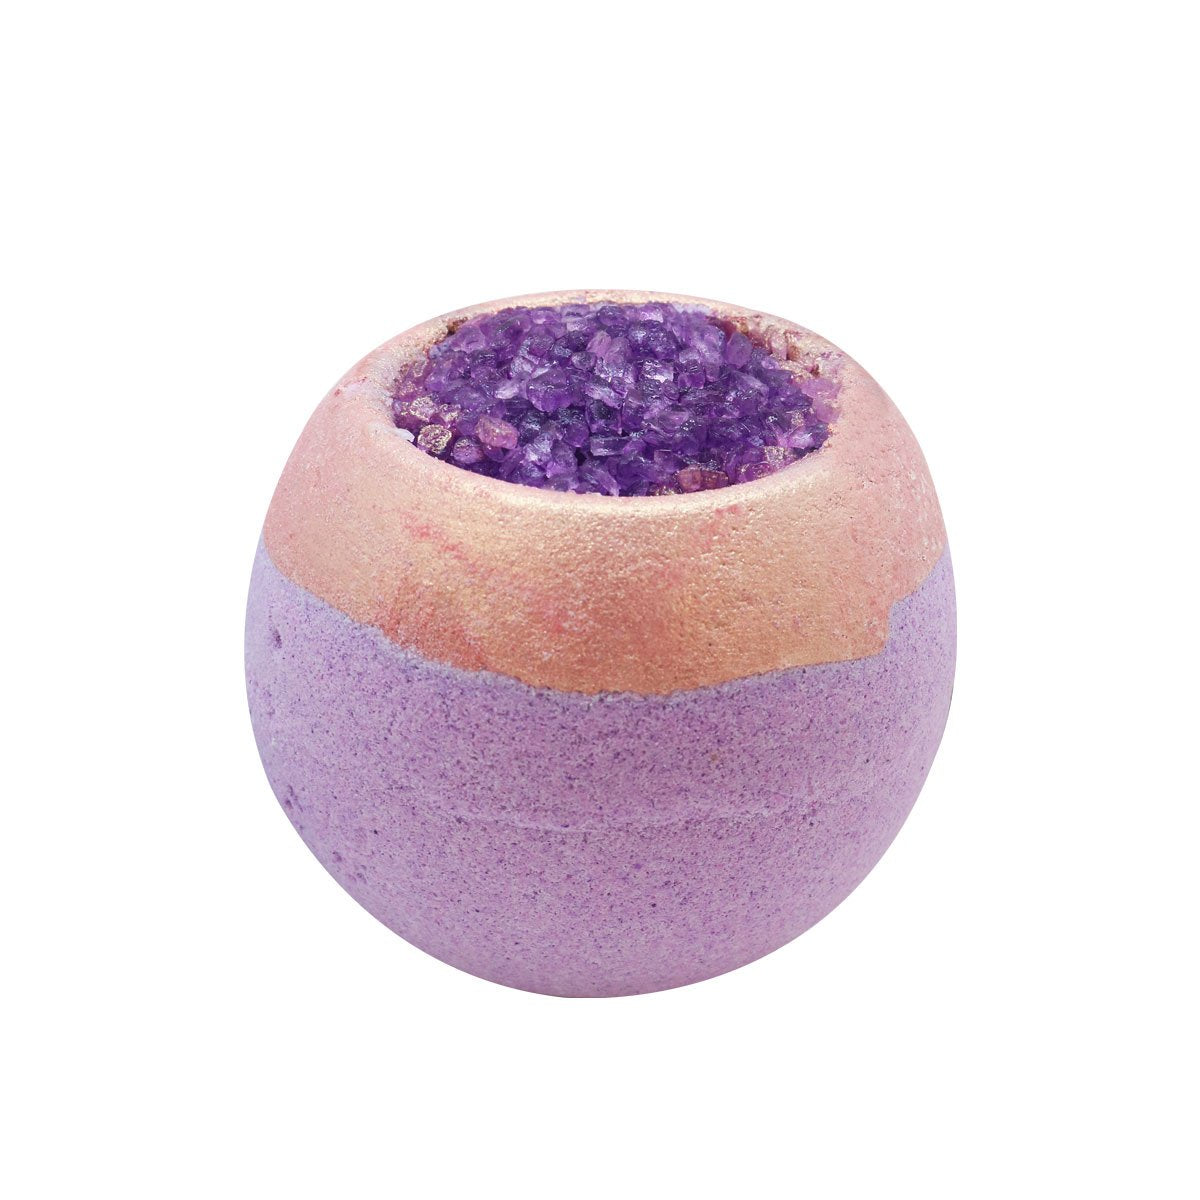  Egg Shaped Relax Bath Bombs (6 Pack) with Kaolin Clay